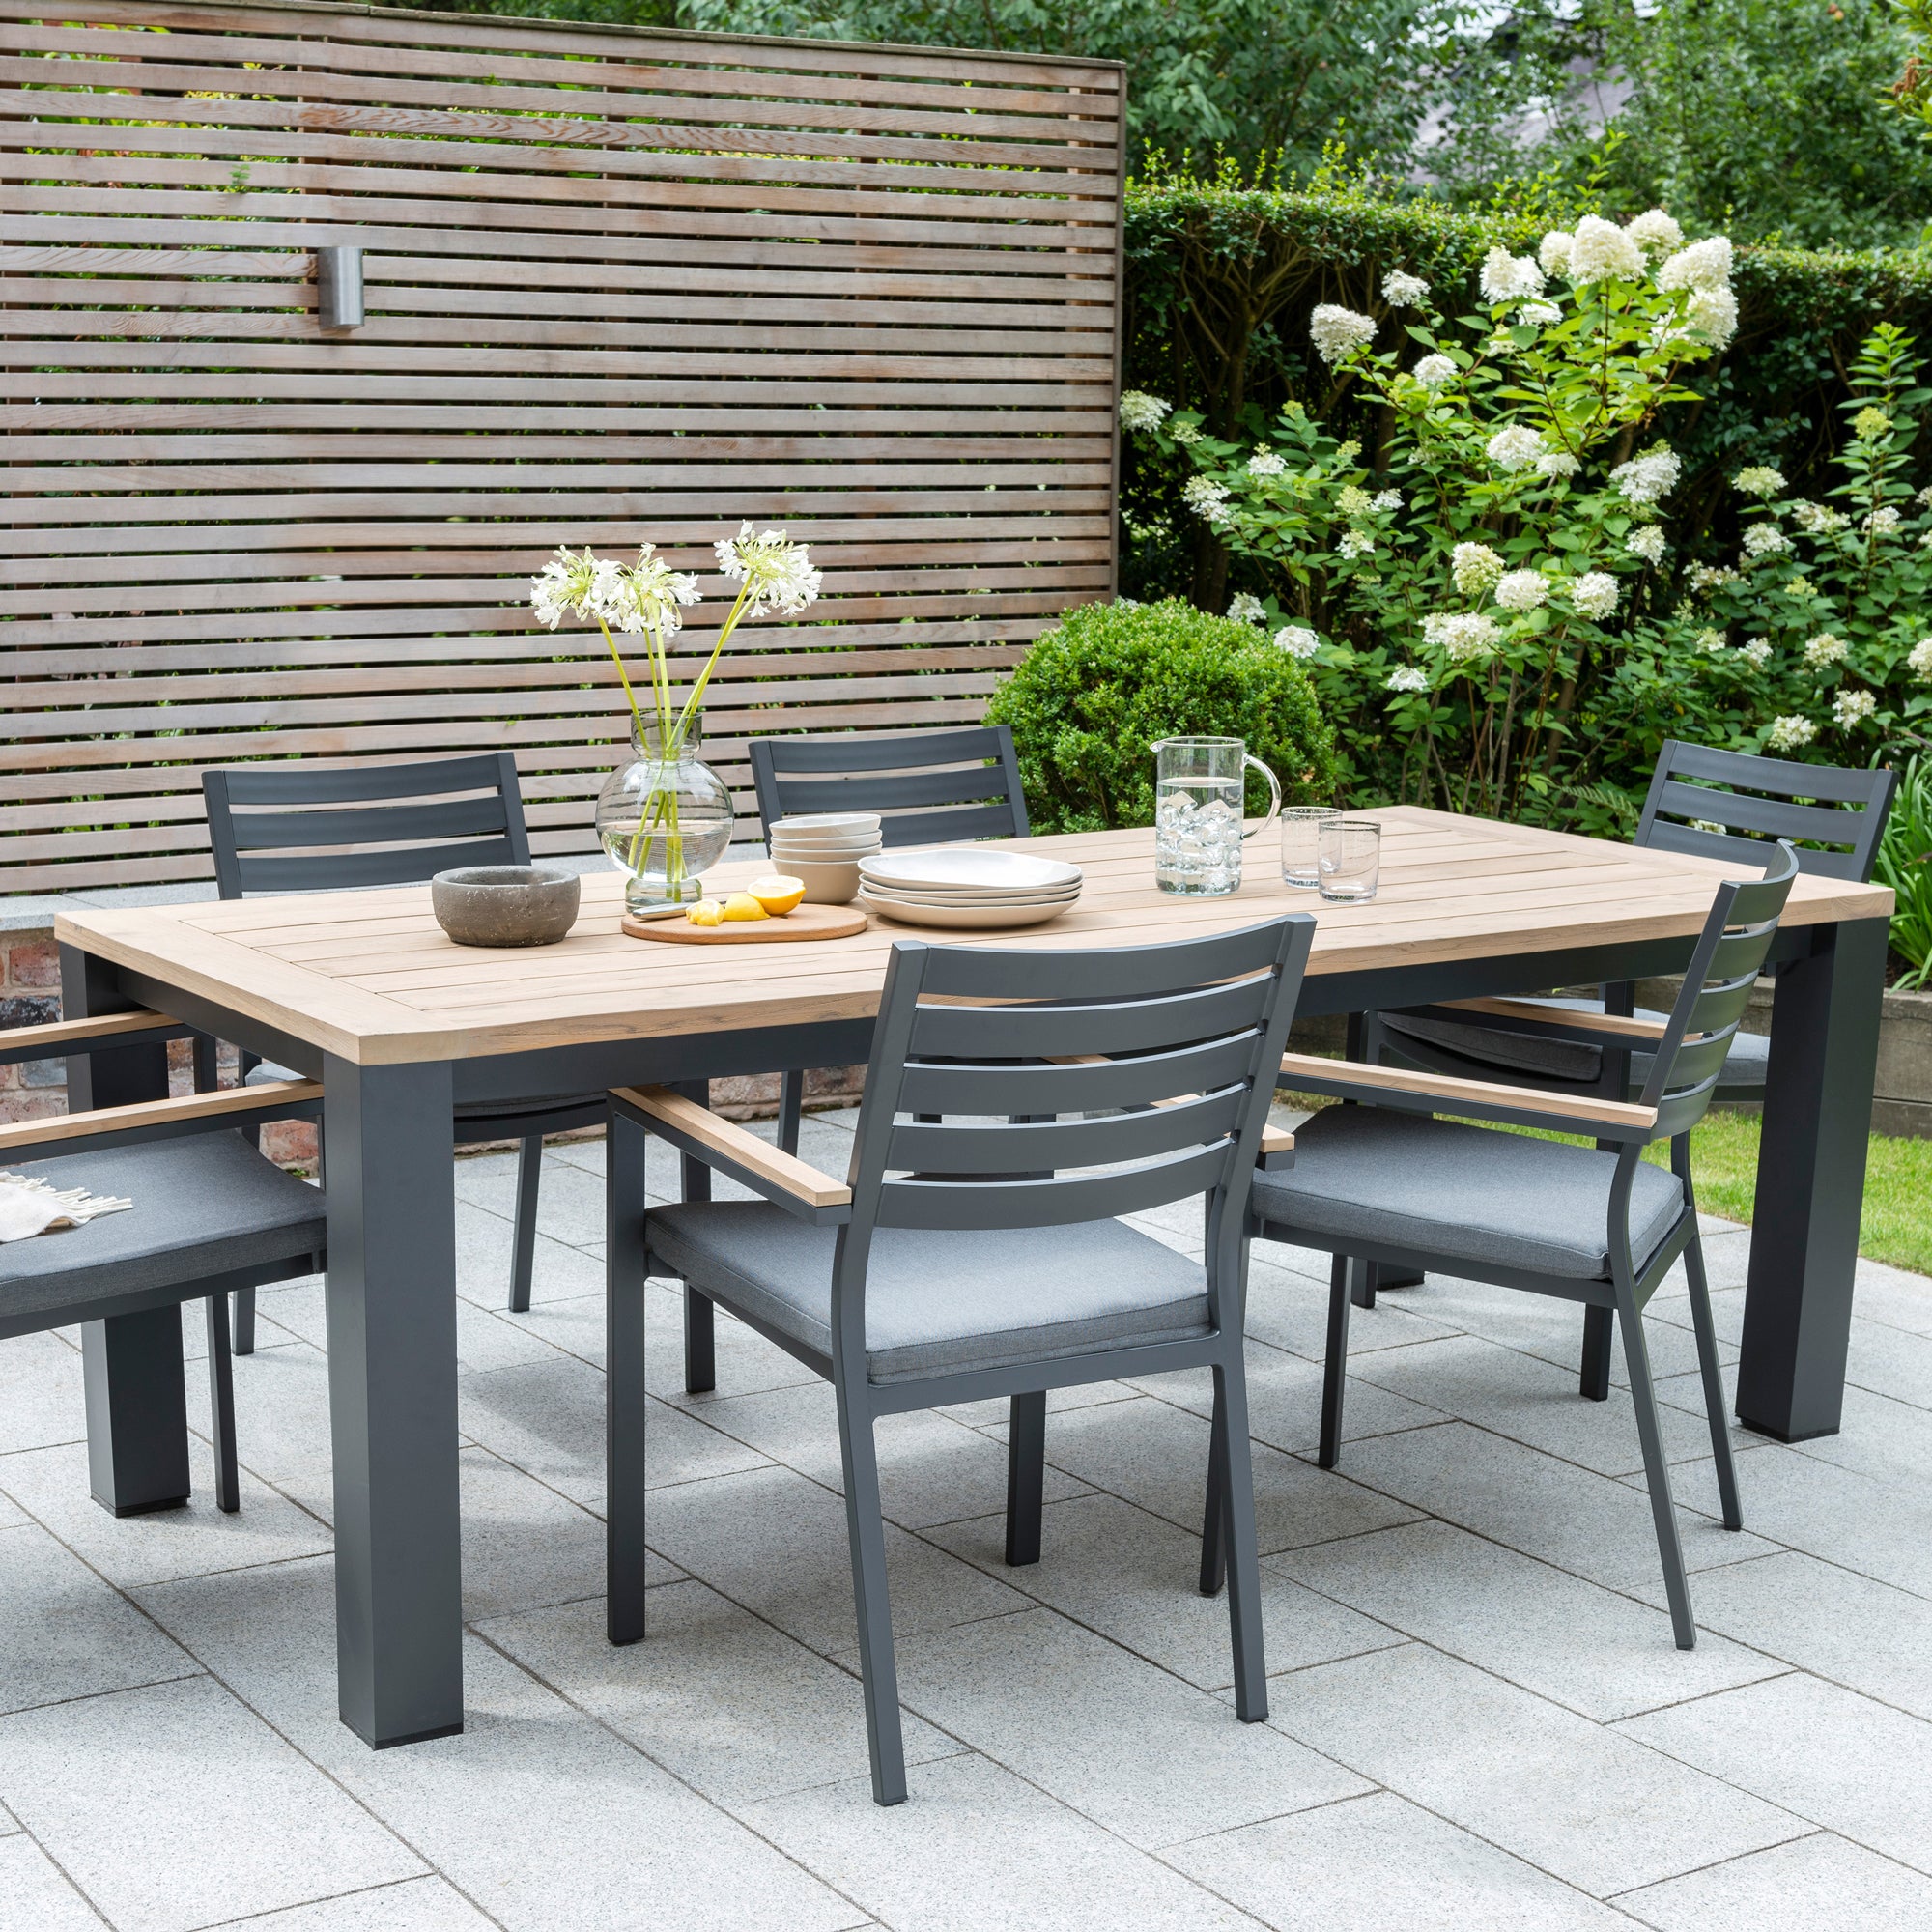 Elba Dining Collection with aluminum frame and teak table top and accents